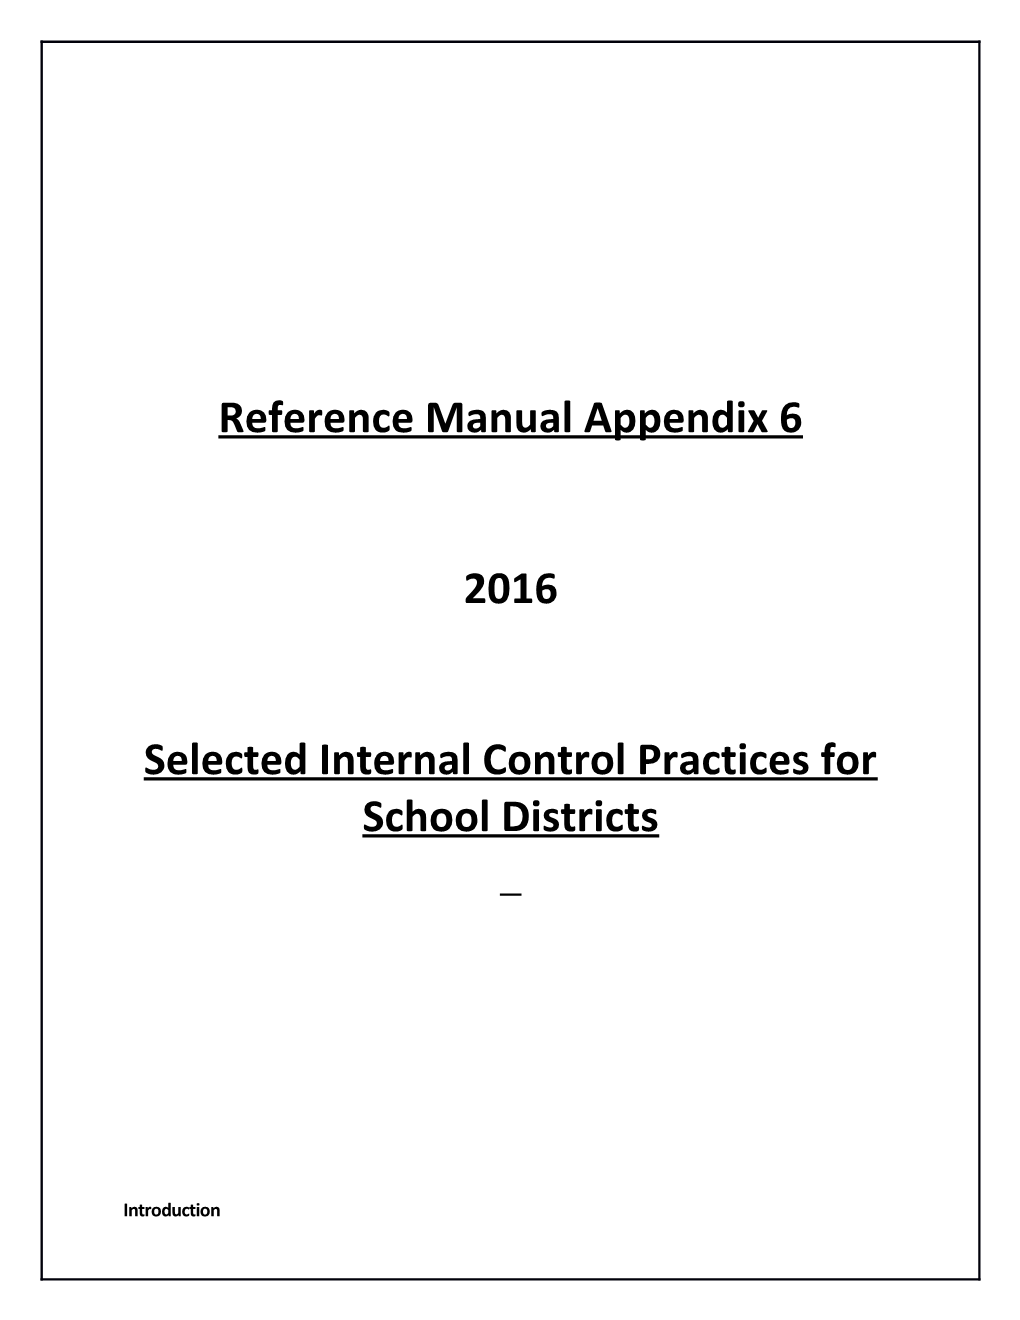 Selected Internal Control Practices for School Districts